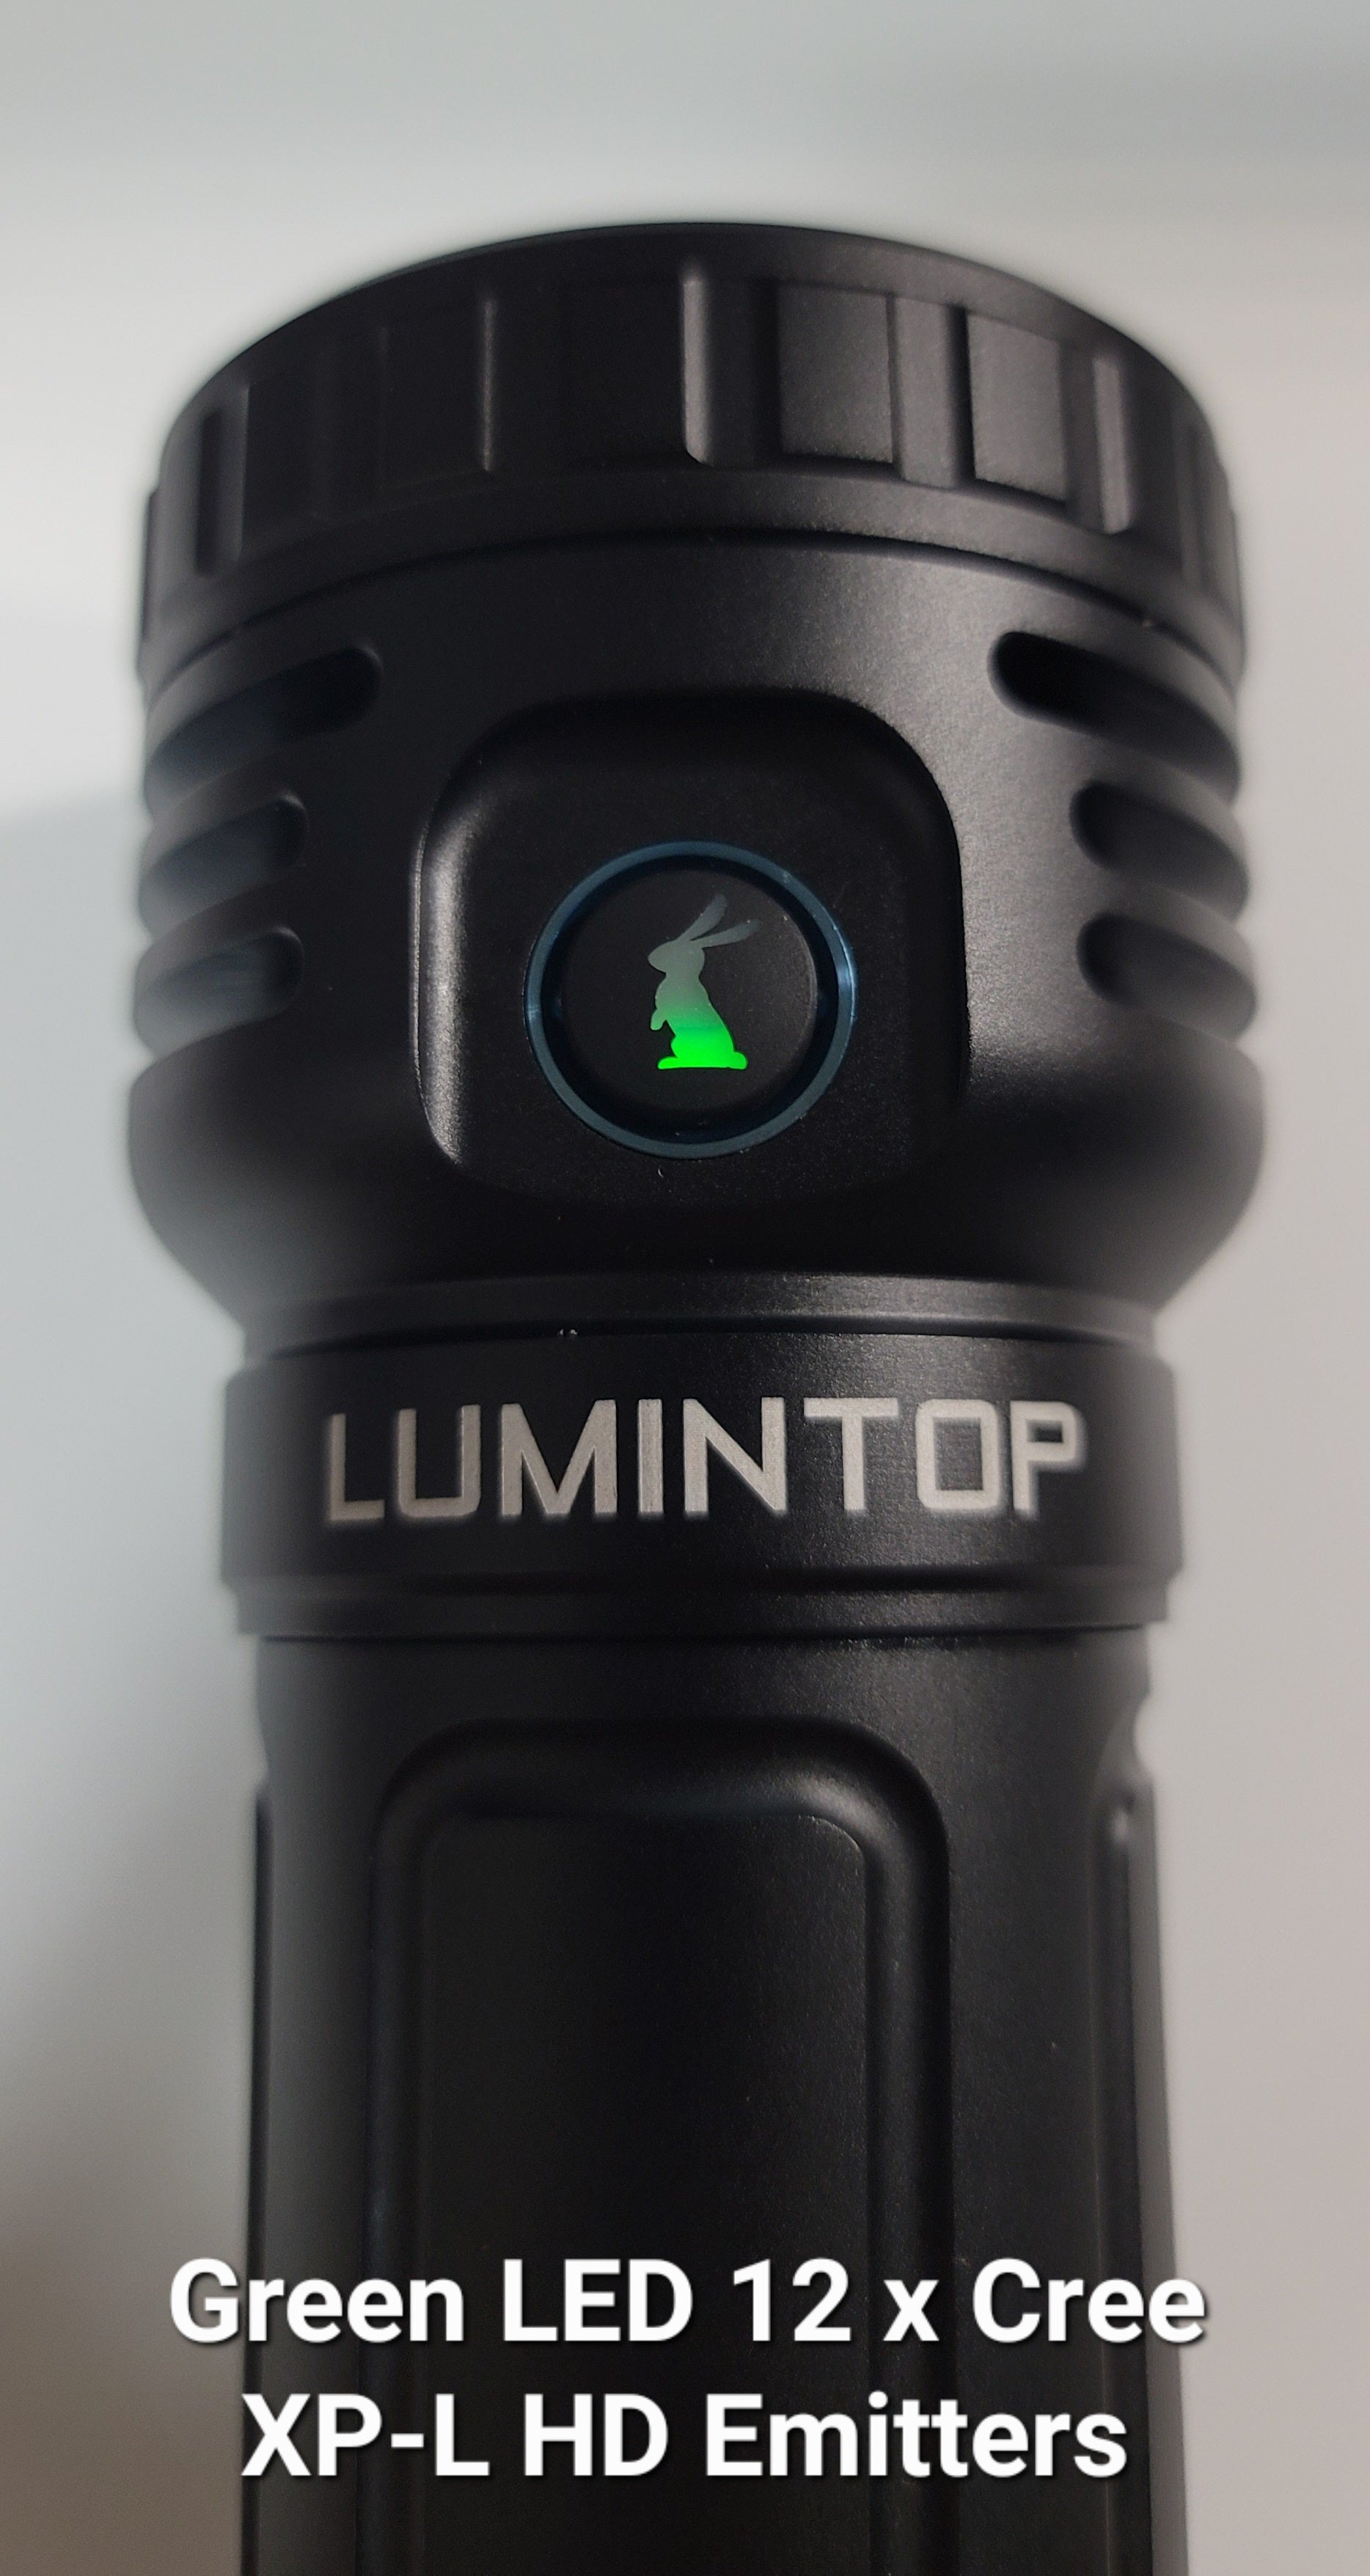 Lumintop Thor Pro 12,600 Lumens LEP LED Type-C Rechargeable Outdoor Flashlight